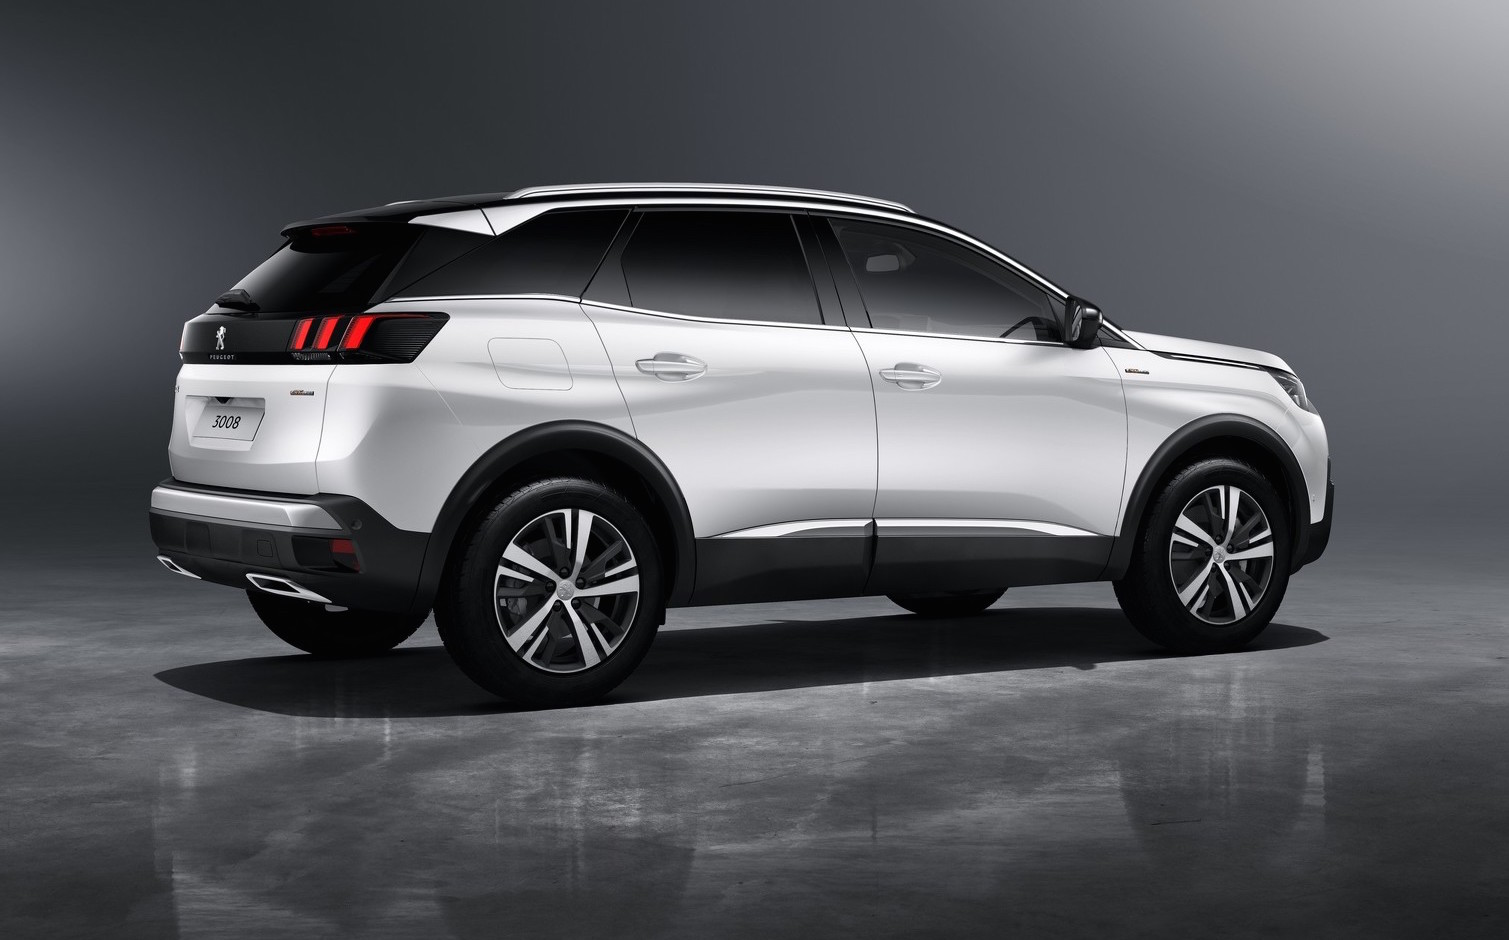 5 Interesting Facts About Peugeot SUV’s